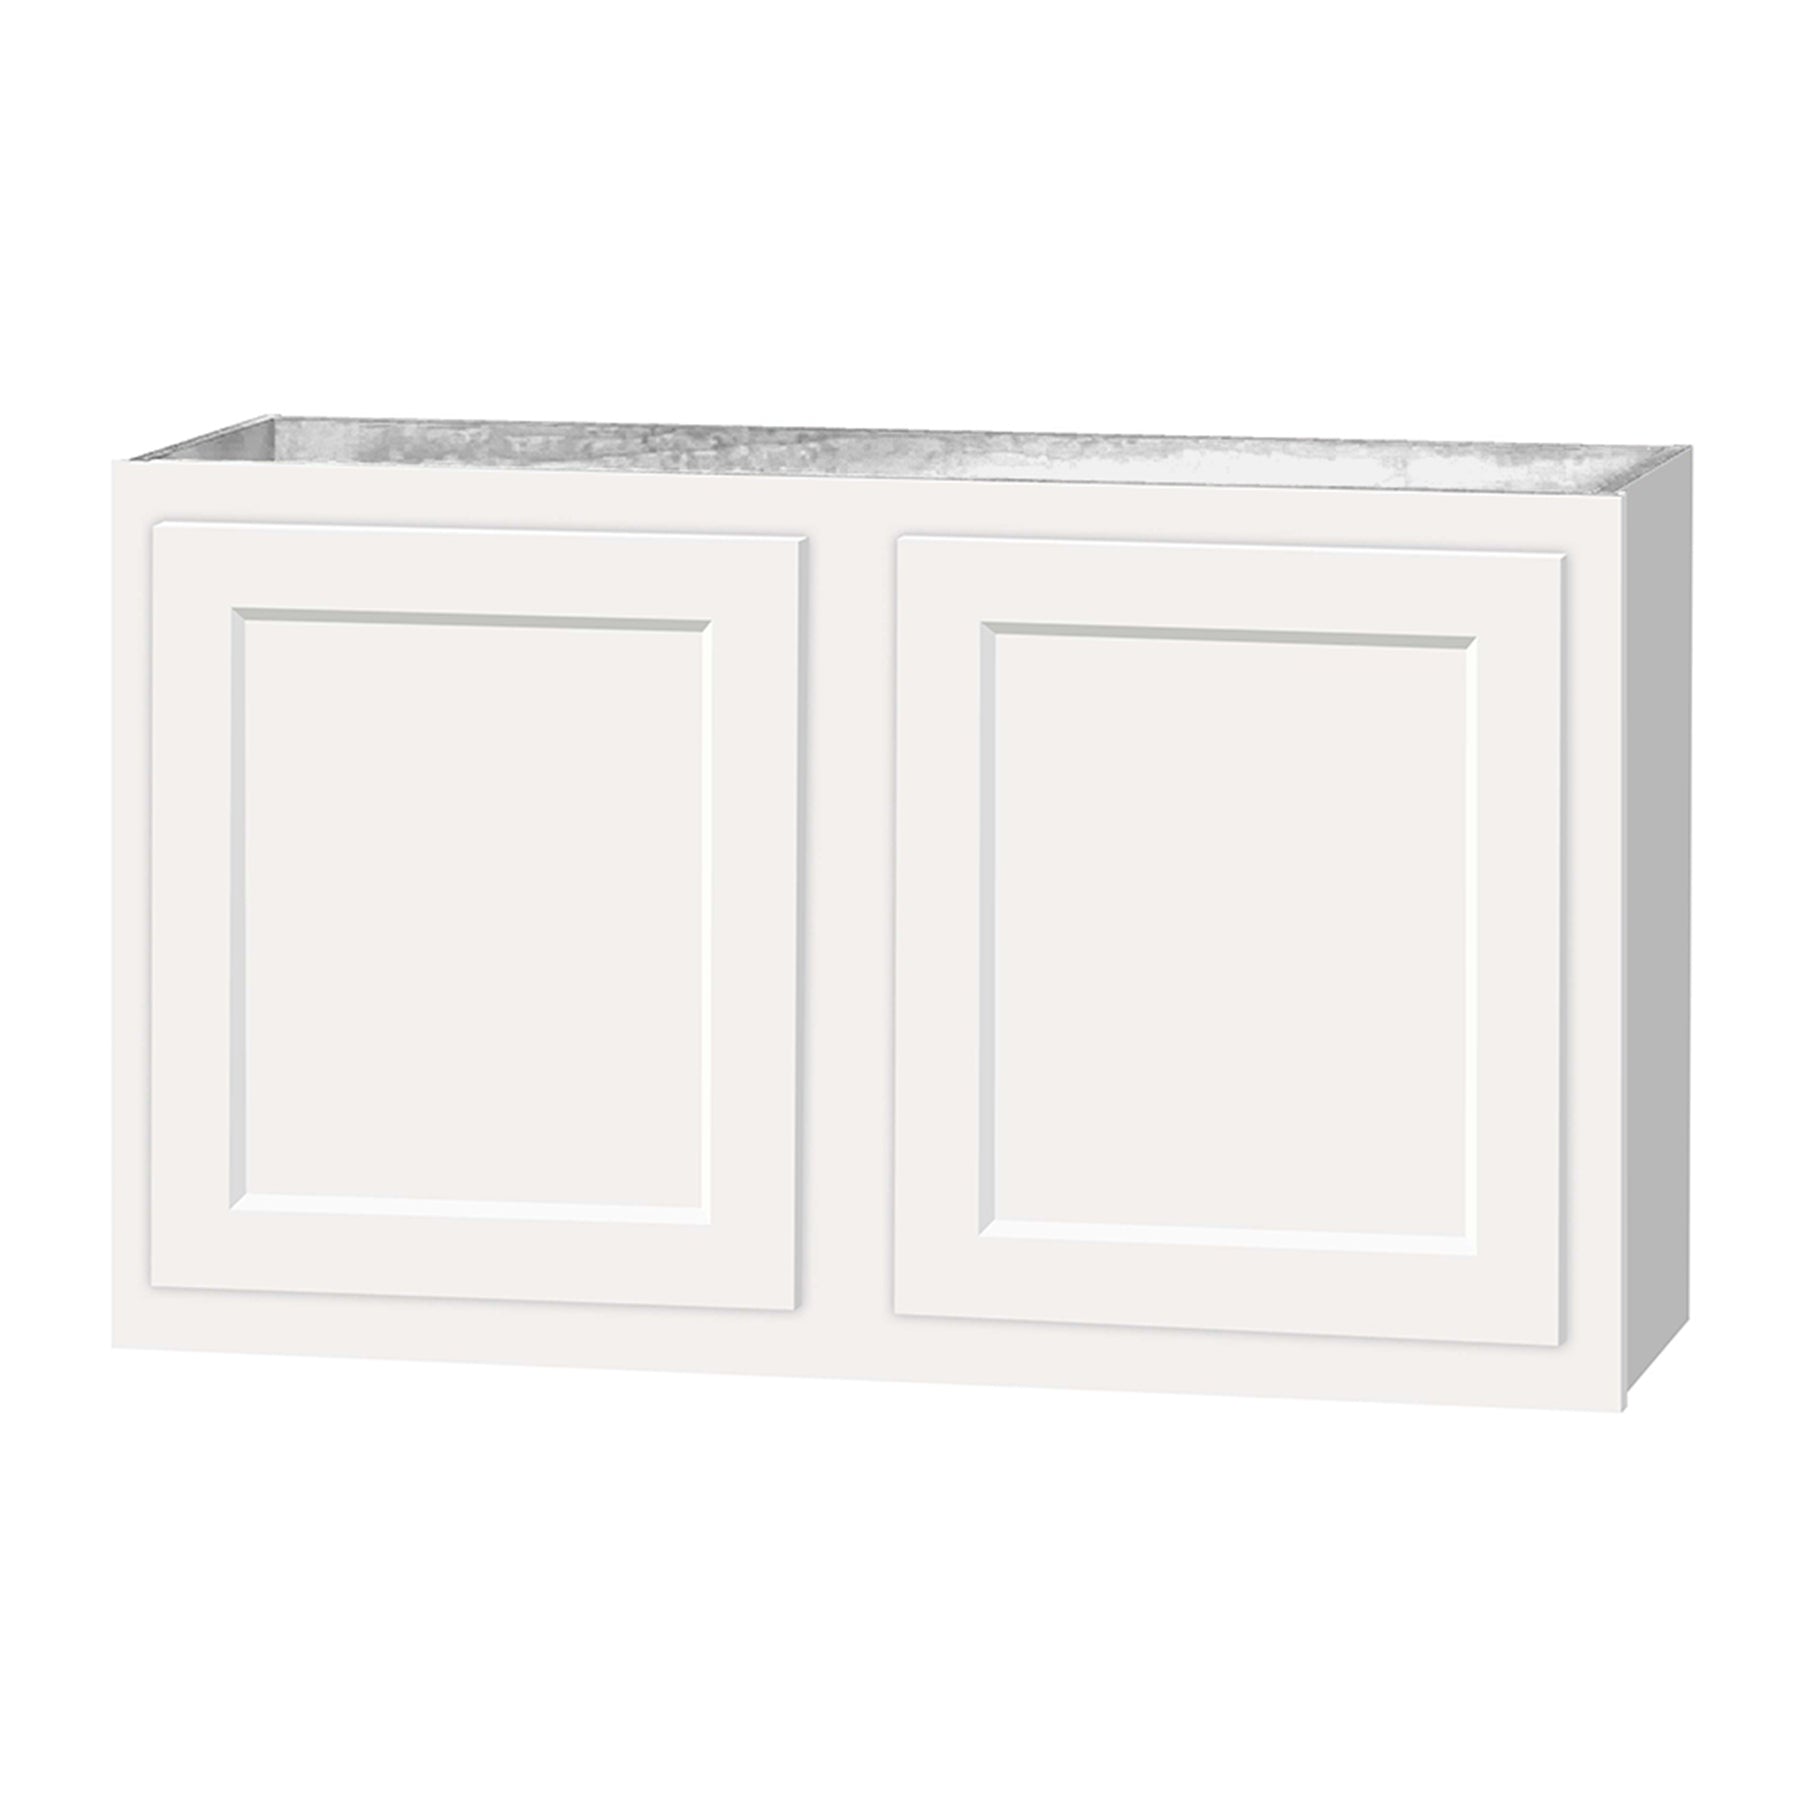 21 inch Wall Cabinets - Dwhite Shaker - 36 Inch W x 21 Inch H x 12 Inch D